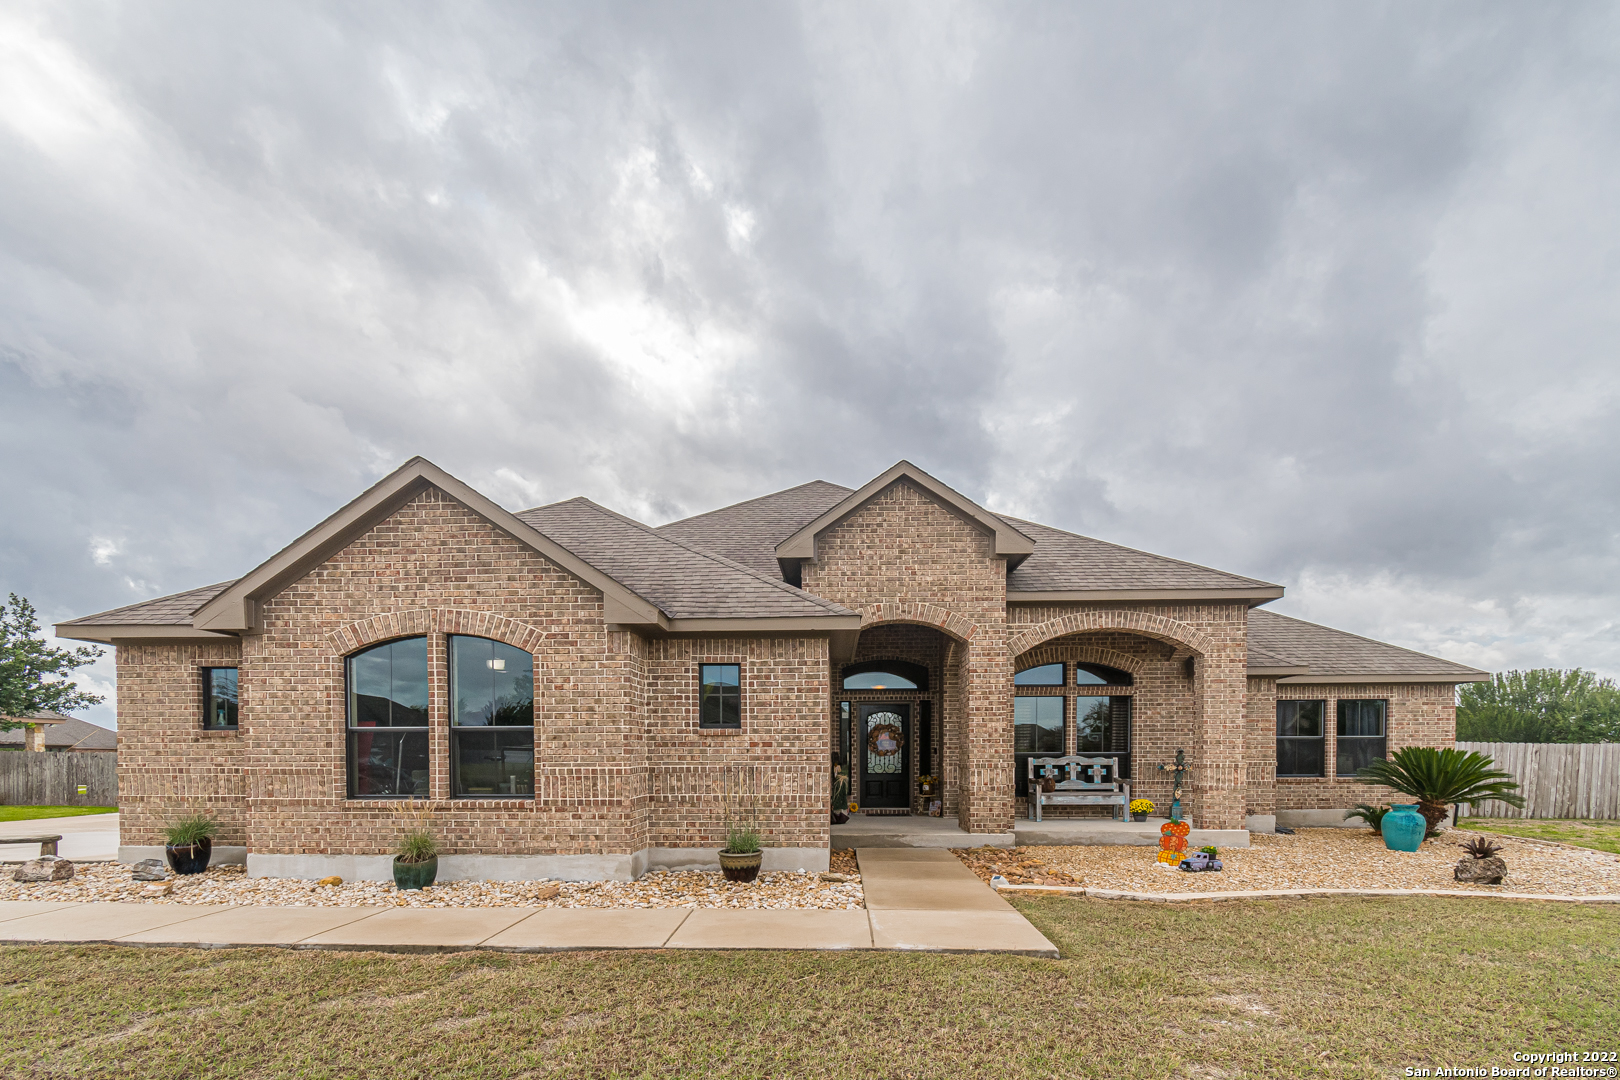 STUNNING 2600 Sq Ft Custom Built Home in the Popular Summit Subdivision and Navarro ISD! High End finished features in this 4 Bedroom (4th Bedroom or Office) / 2.5 Bath home on 1/2 Acre lot. As you enter the home your welcomed by a Large kitchen island and open floorplan that are all CROWNED with wood beams that carry into the PRIMARY BEDROOM! Kitchen is designed with entertaining in mind with GRANITE COUNTER TOPS, POT FILLER , CUSTOM BACKSPLASH, BUILT IN OVEN with CONVECTION, COFFEE BAR, WINE STORAGE and WALK IN PANTRY...A CHEF'S DREAM! A MUST SEE IS THE PRIMARY BEDROOMS CLOSET...DRESSER/JEWELRY AREAS ALL BUILT IN! PRIMARY BEDROOM HAS AMAZING WINDOWS for LIGHTING, WOOD FLOORING and sits off the BACK of the home for privacy. Livingroom area is a step away from the LARGE COVERED BACK PORCH with a hot tub that all overlook the private back yard & pool. THIS IS A VERY WELL MAINTAINED HOME AND WILL NOT DISAPPOINT!